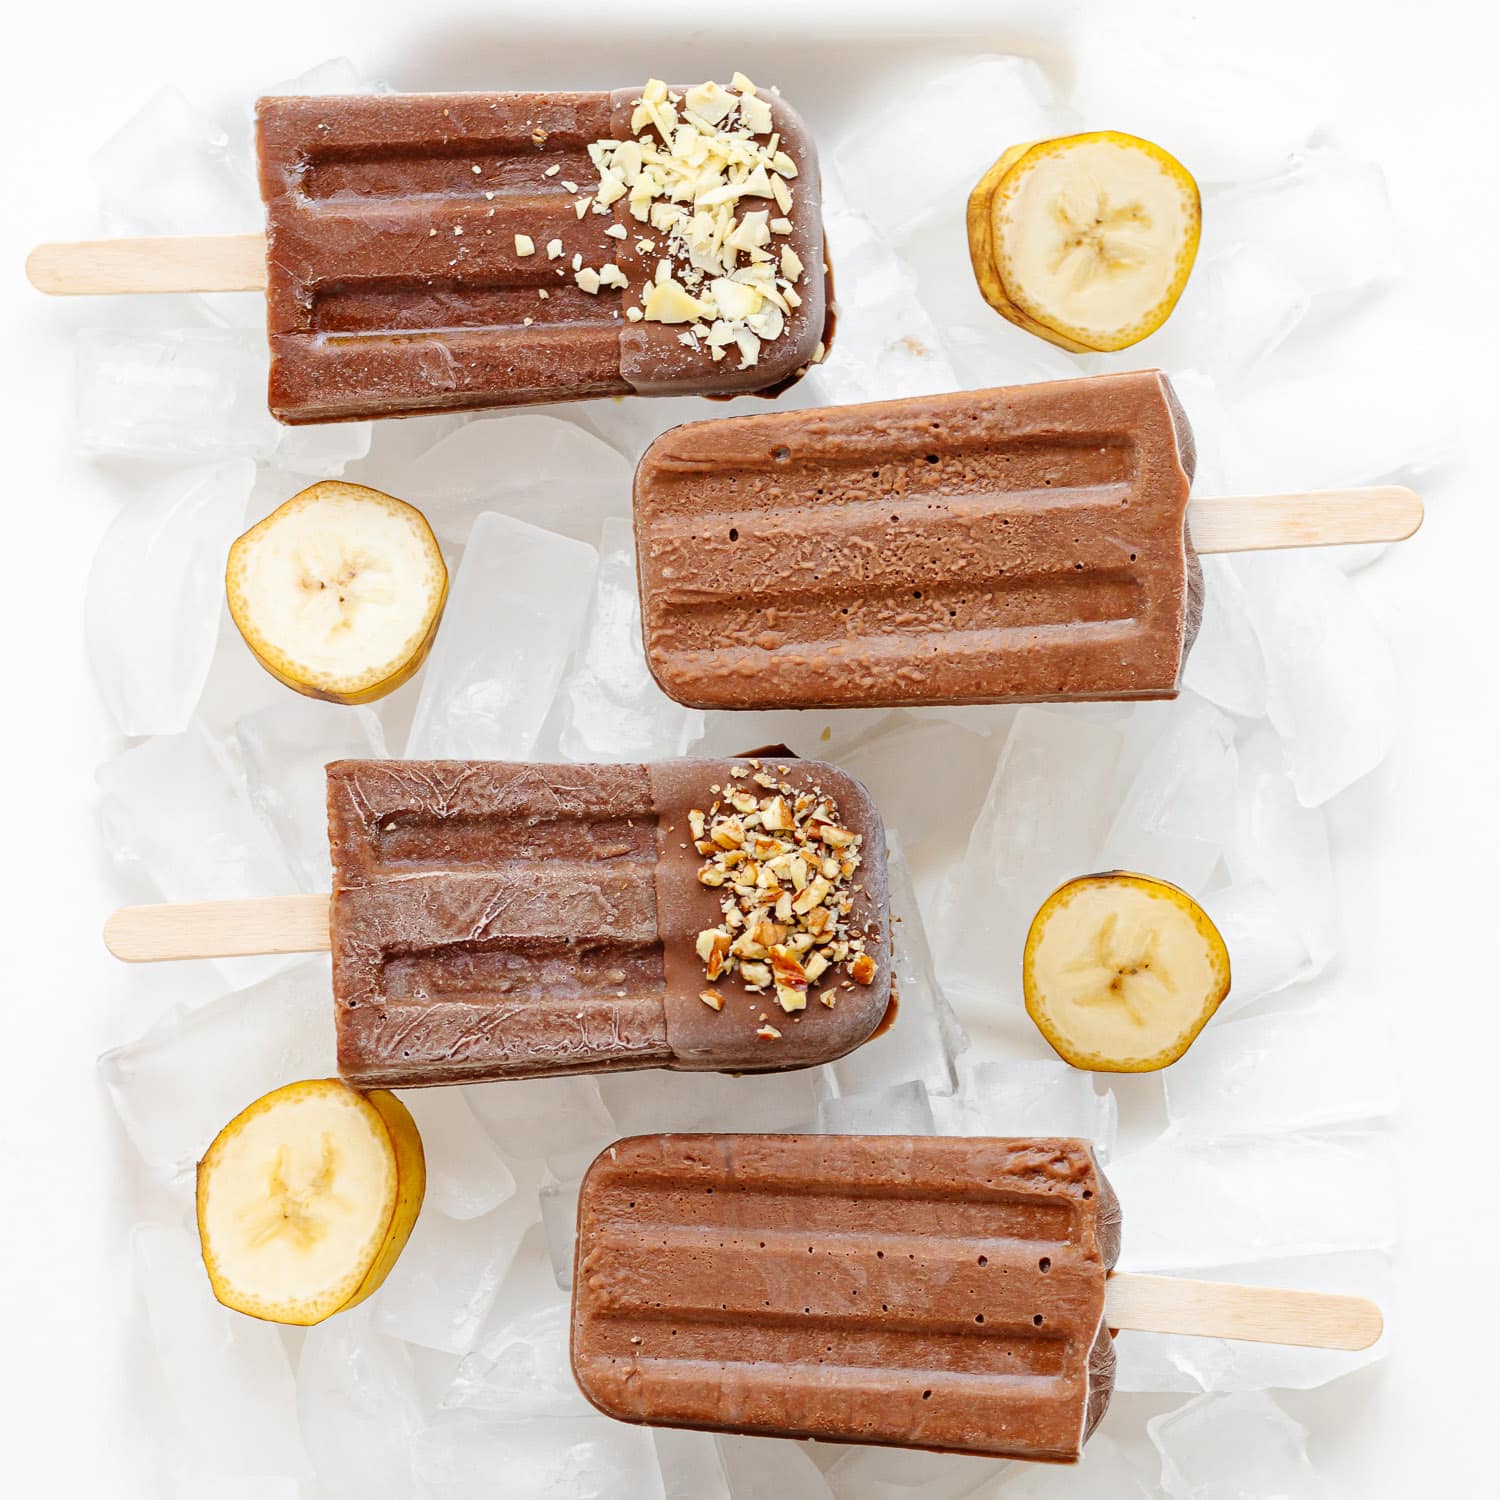 Chocolate banana popsicles sitting on ice with banana slices scattered around them.